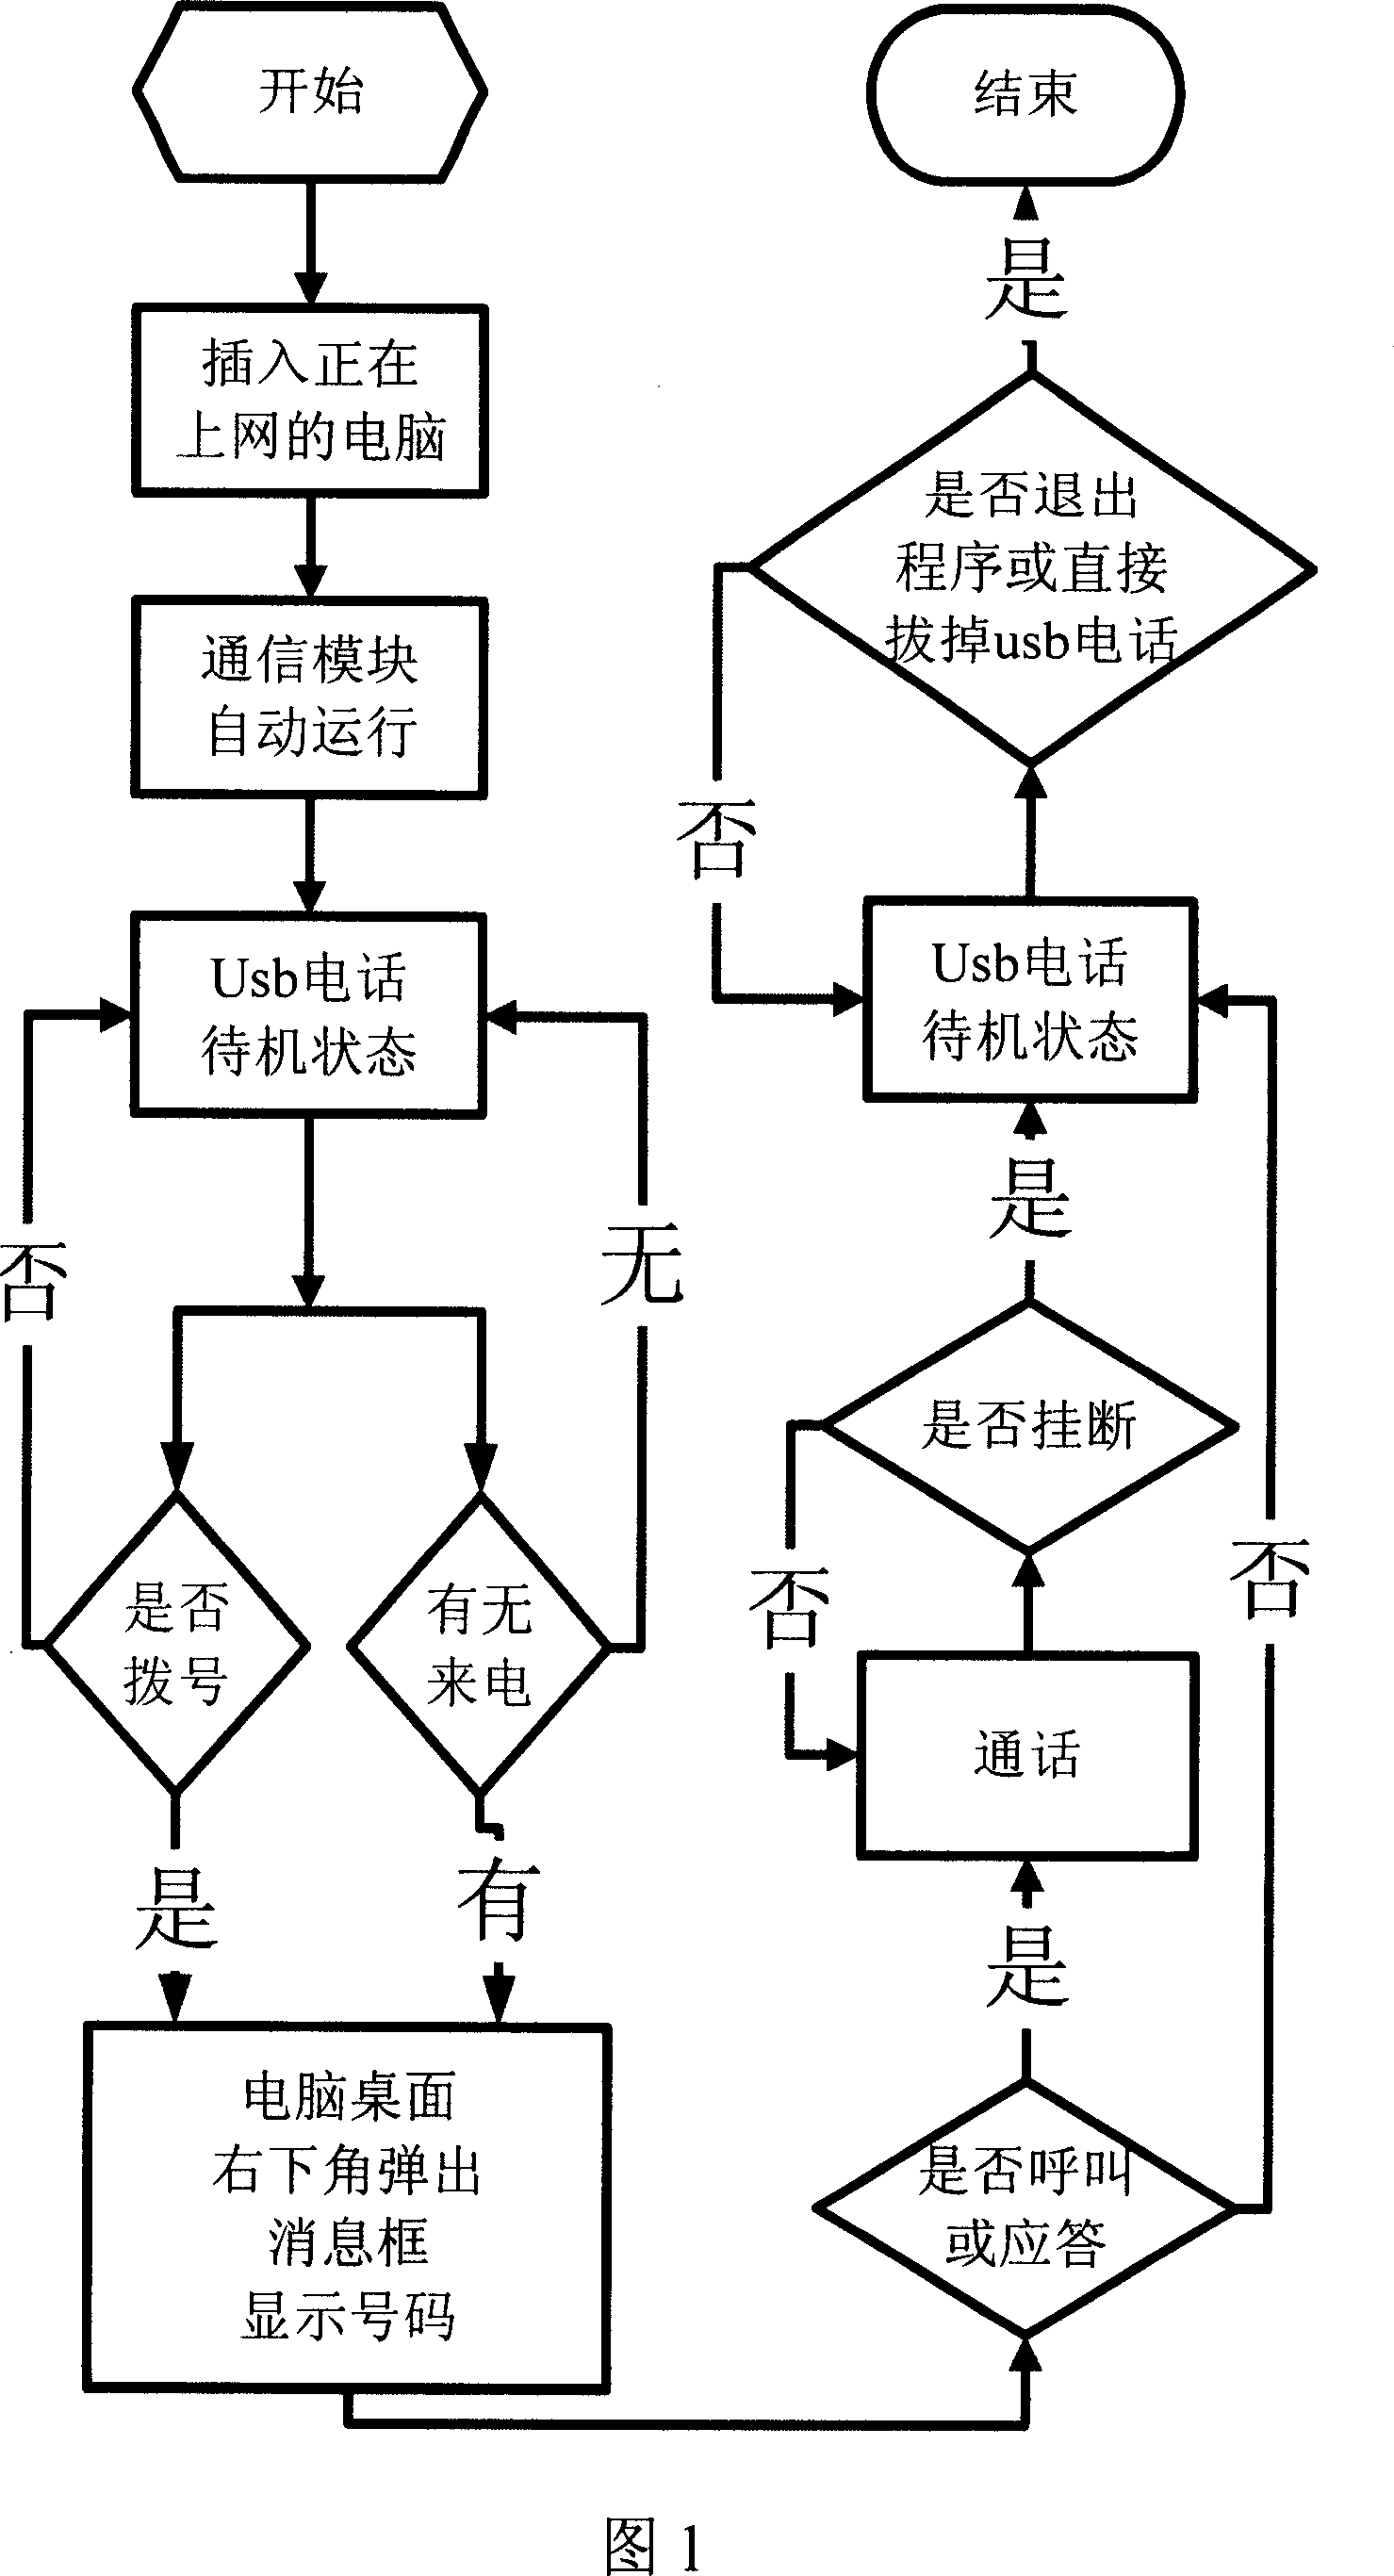 Method for making USB telephone UPNP carry out speech communication by on-line computer